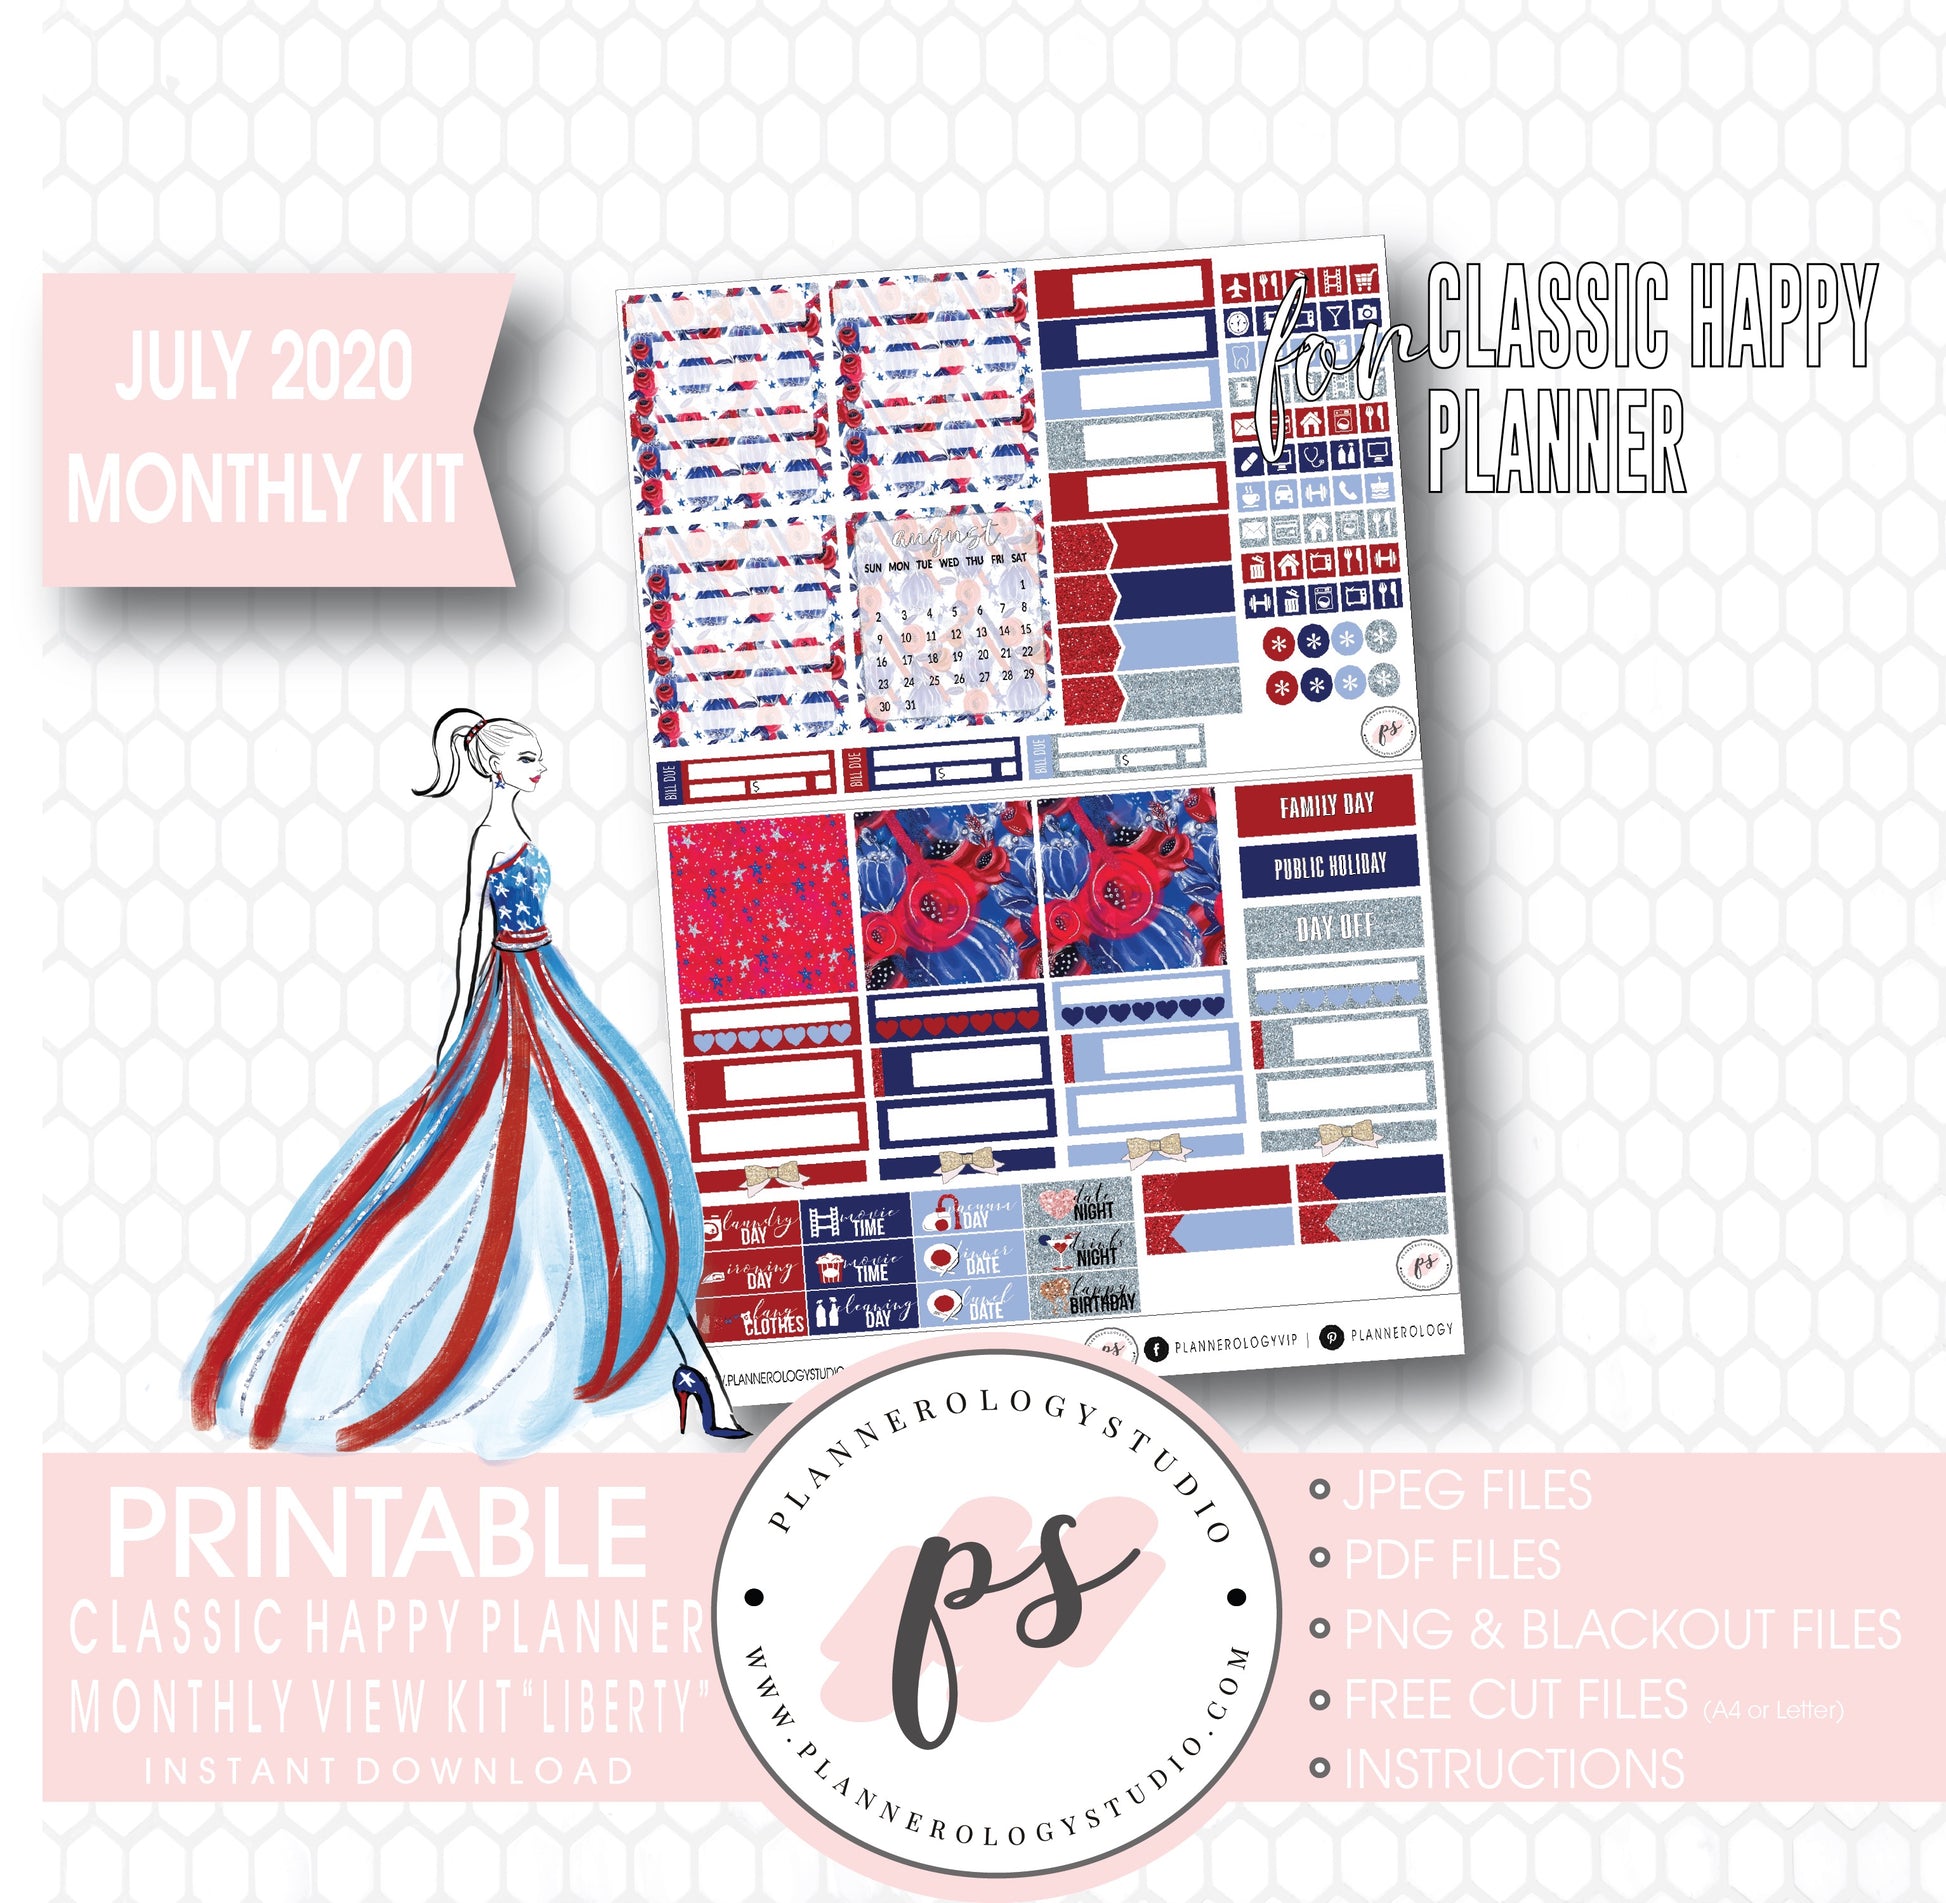 Liberty Independence Day July 2020 Monthly View Kit Digital Printable Planner Stickers (for use with Classic Happy Planner) - Plannerologystudio